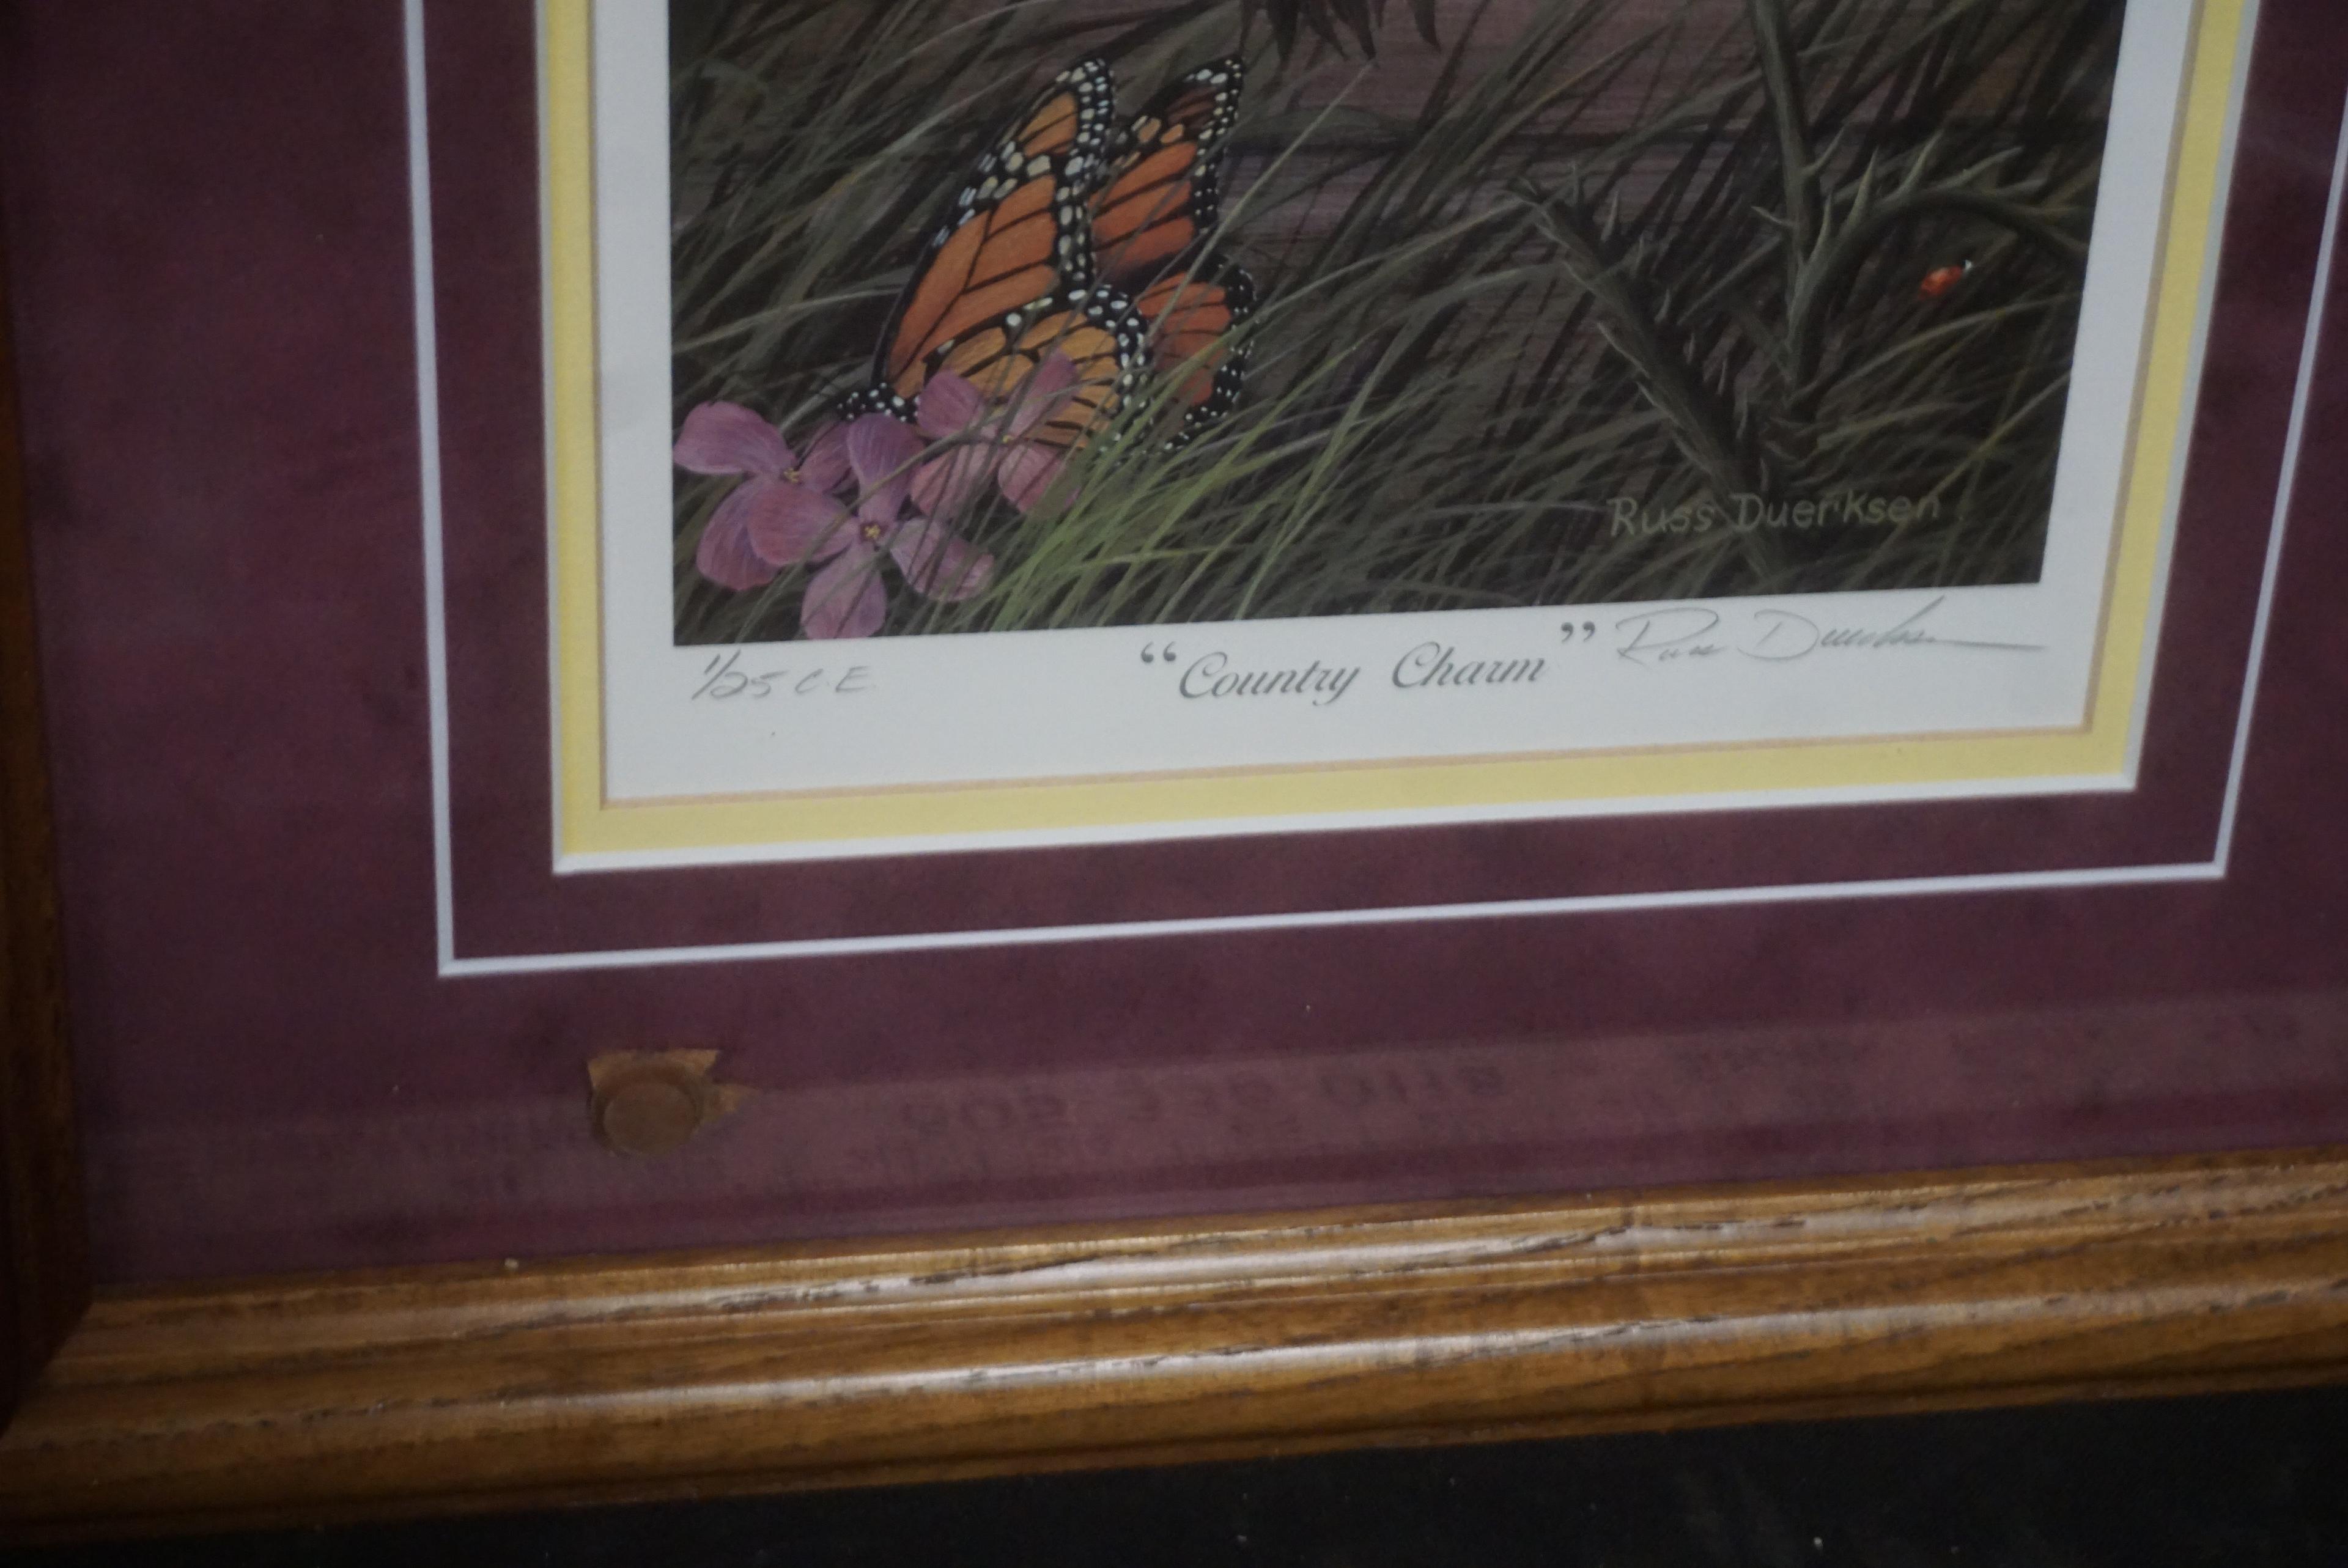 Signed Russ Duerksen Pictures - "Country Charm" 1/25 C.E. & "Essence Of Spring" 460/950